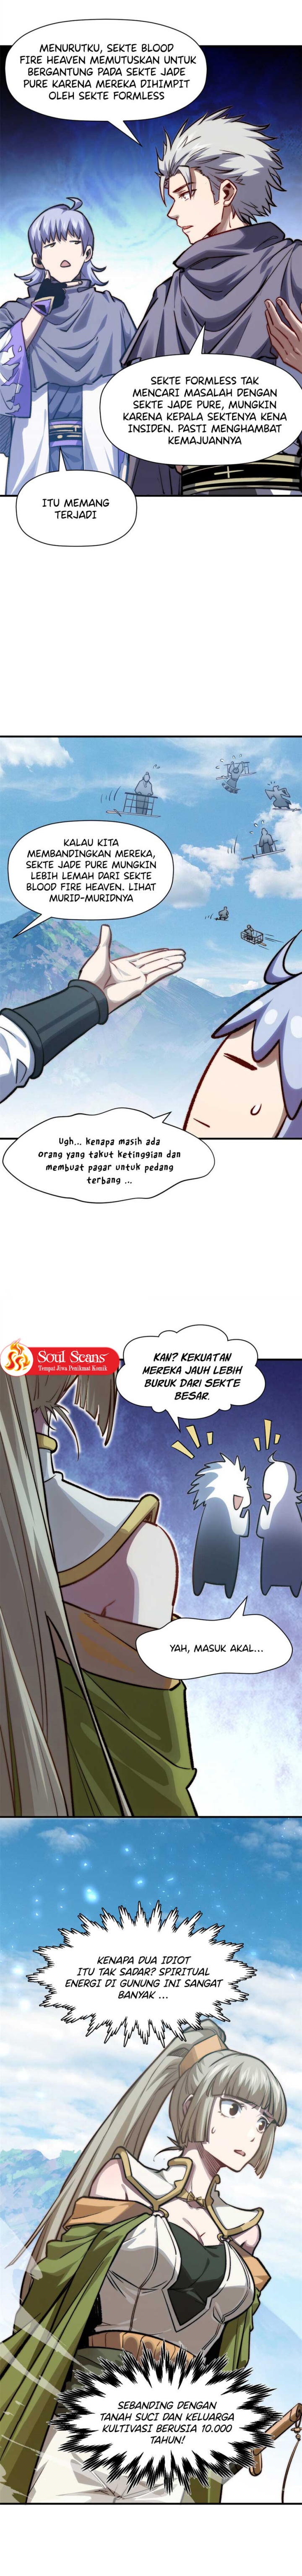 Dilarang COPAS - situs resmi www.mangacanblog.com - Komik top tier providence secretly cultivate for a thousand years 098 - chapter 98 99 Indonesia top tier providence secretly cultivate for a thousand years 098 - chapter 98 Terbaru 6|Baca Manga Komik Indonesia|Mangacan